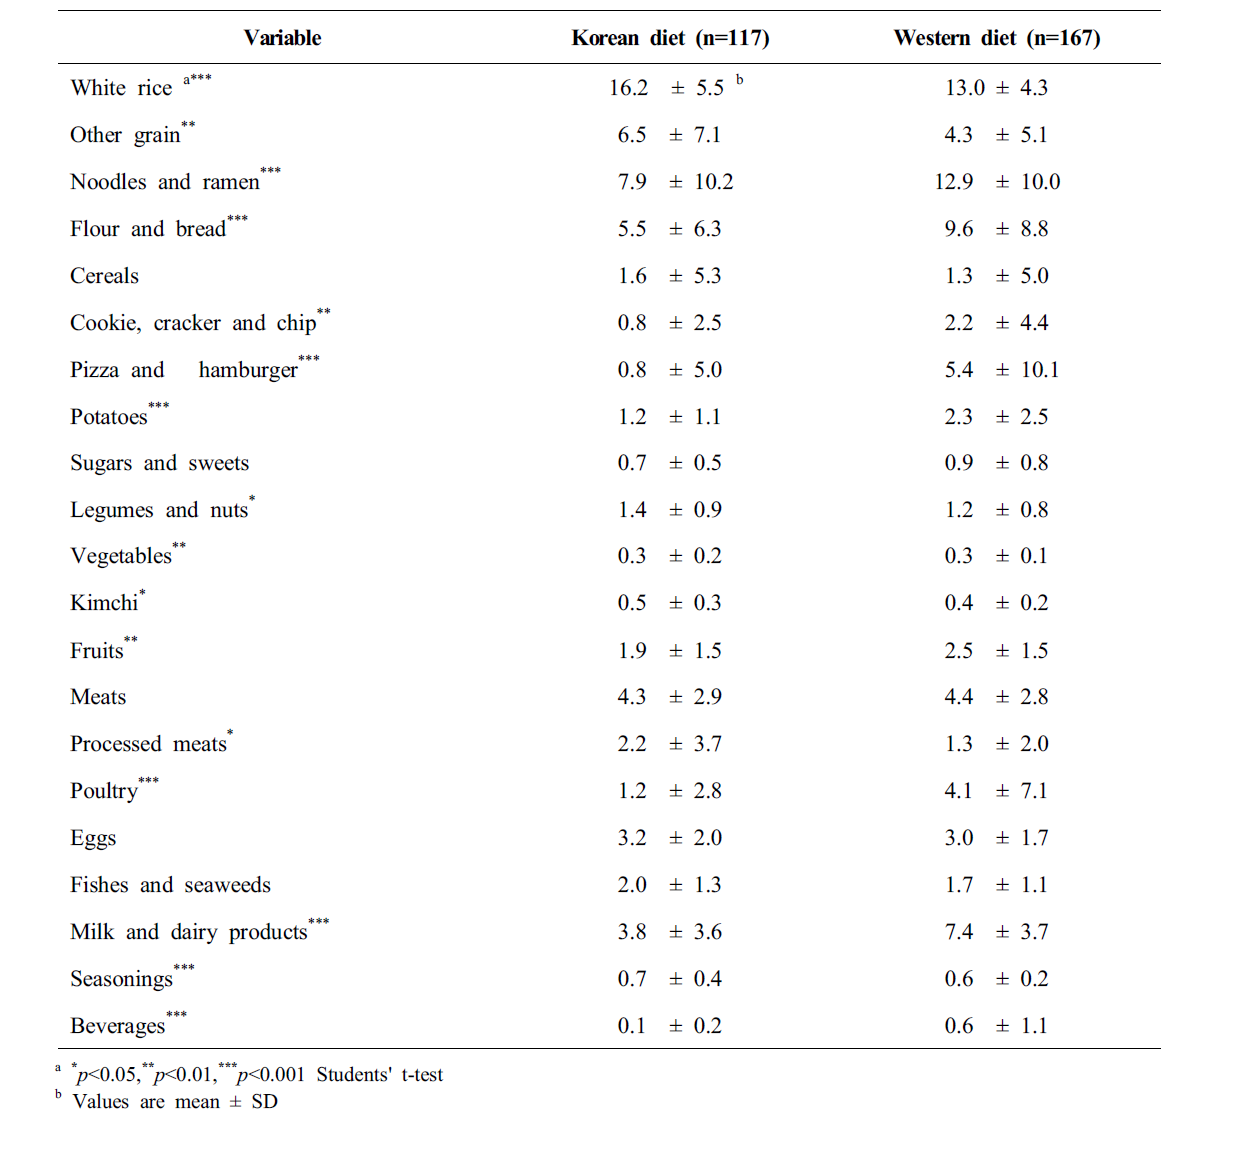 Mean percentage energy contribution from each food group according to dietary patterns